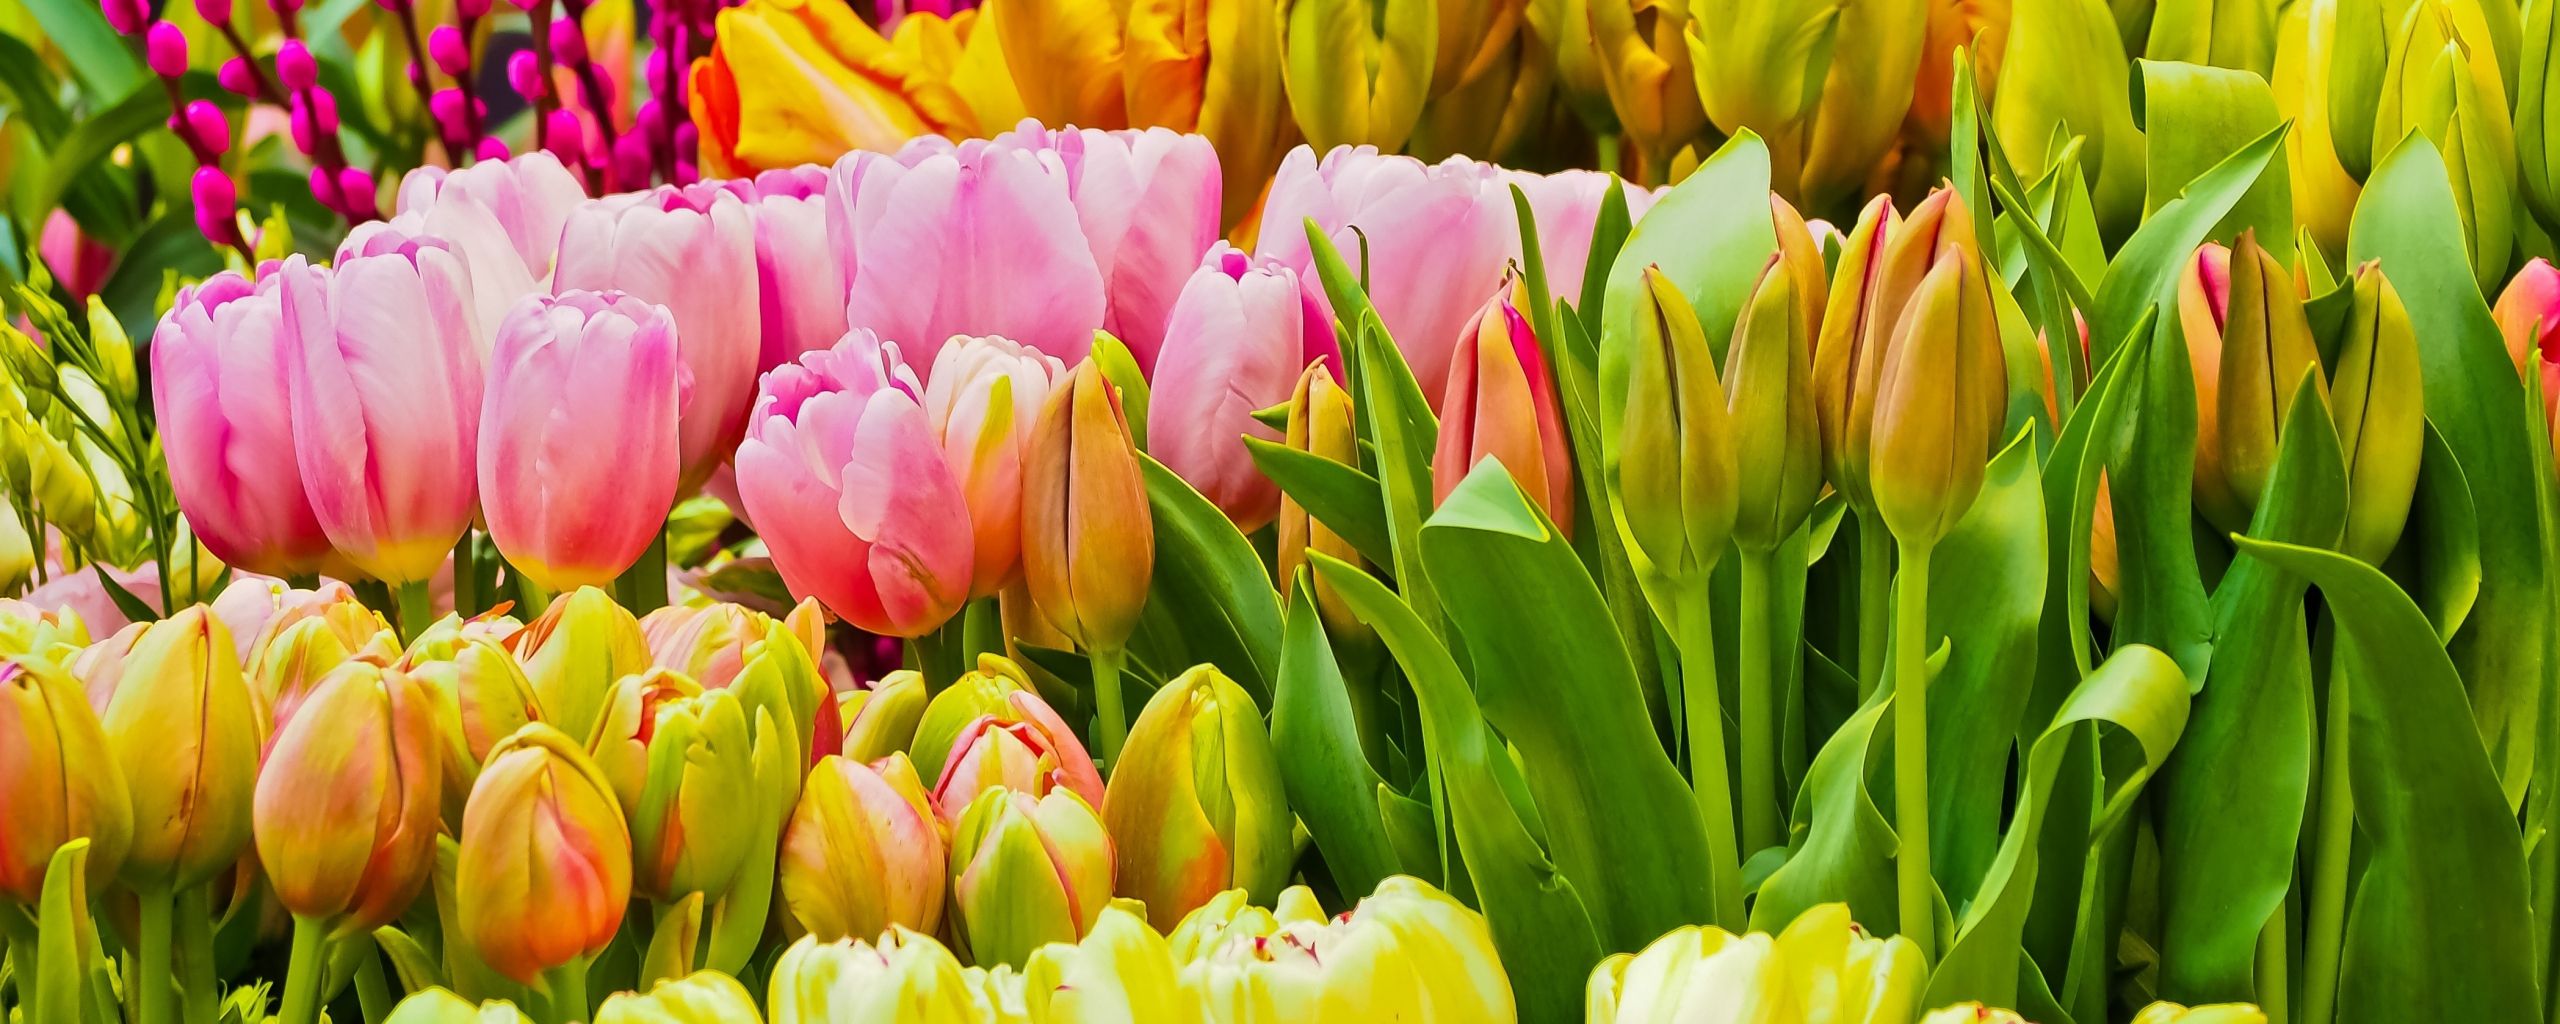 Download 2560x1024 wallpaper fresh flowers, colorful, tulips, dual